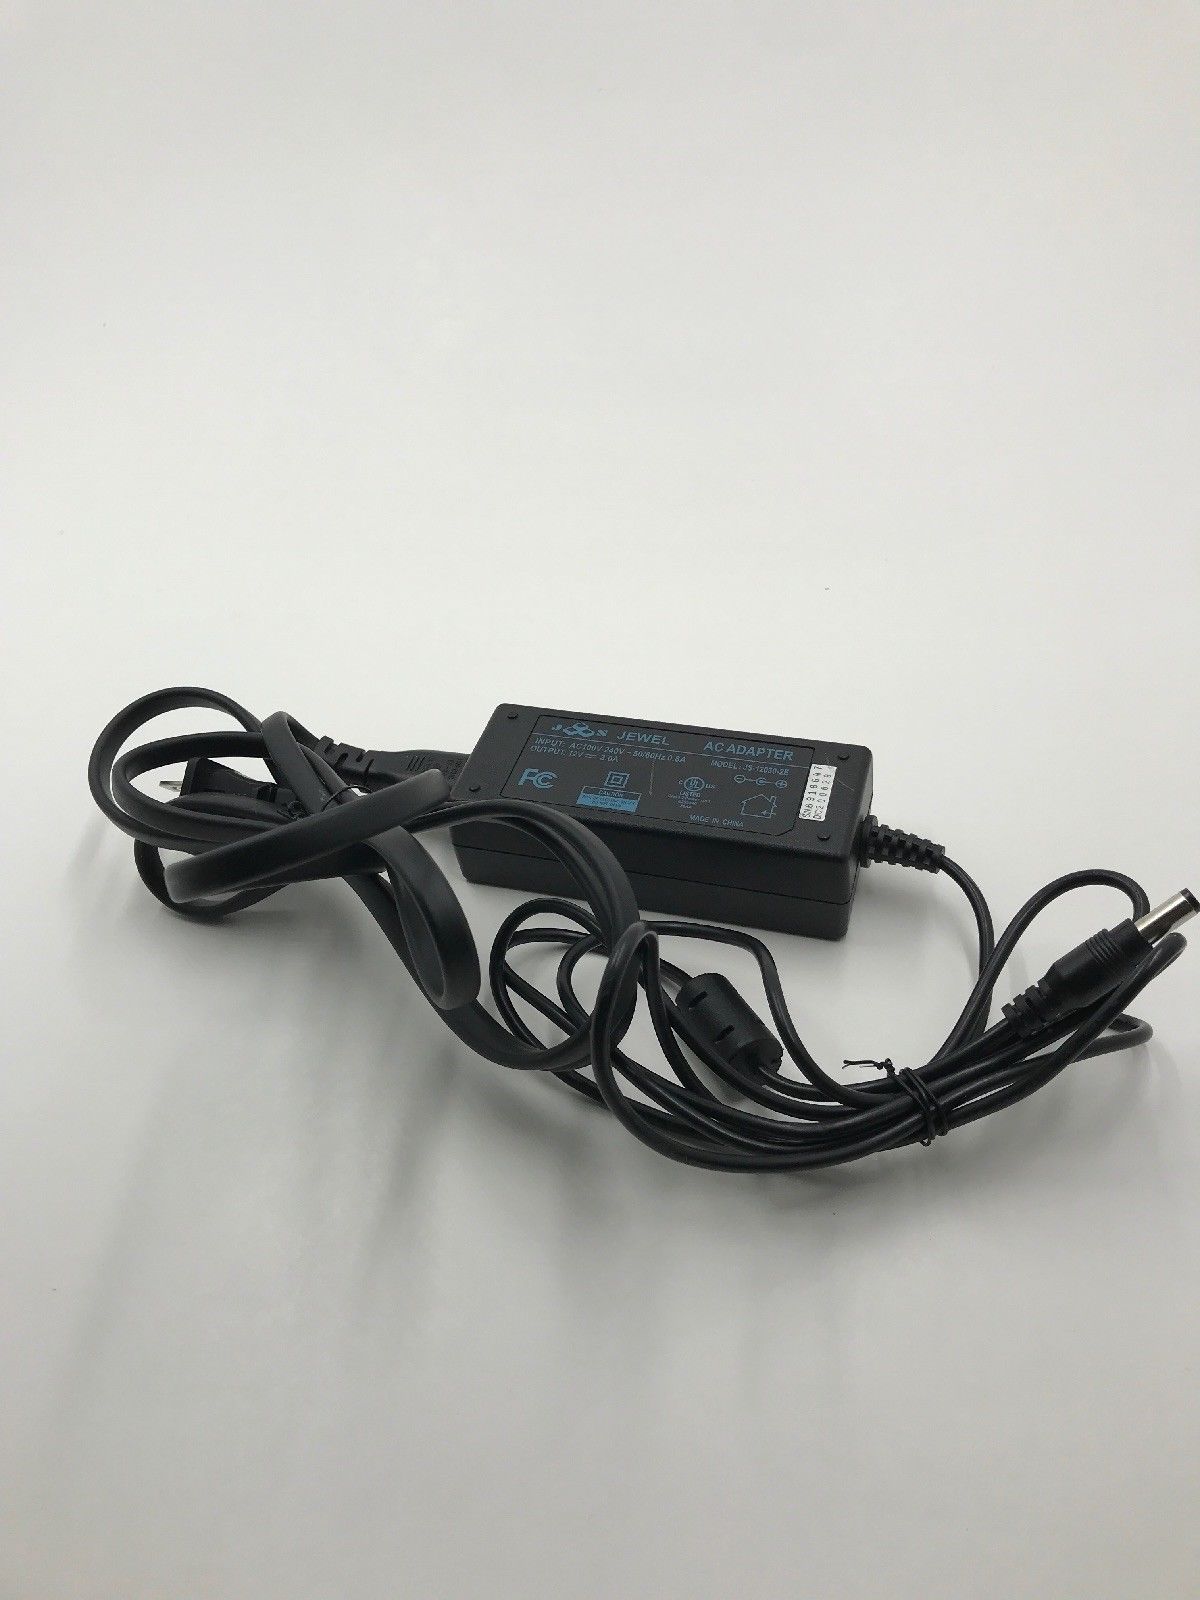 NEW Jewel JS-12030-2E 12V 3A LCD Power Supply Cord Charger AC DC Adapter